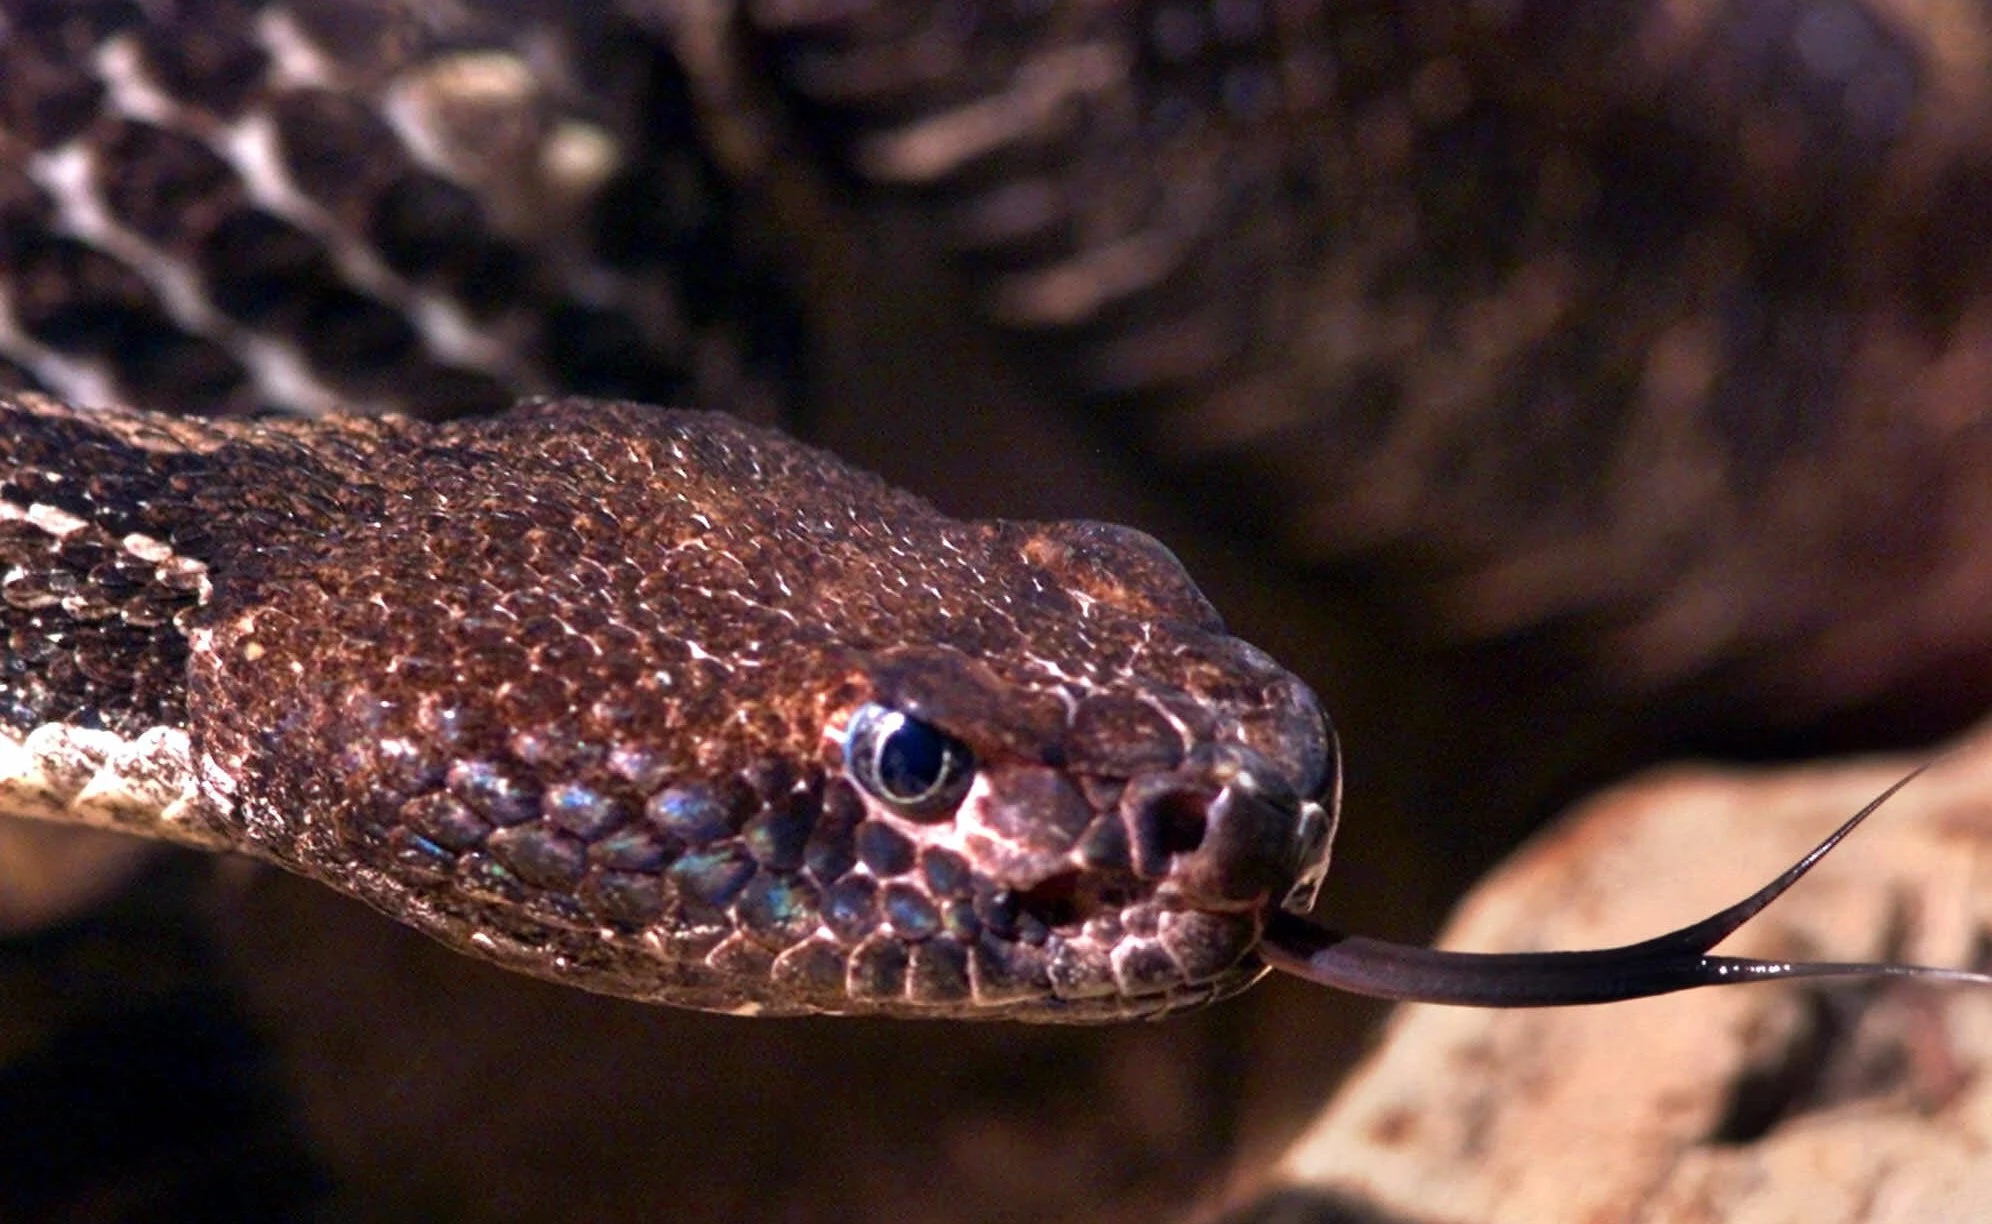 Venomous snakes in New Jersey (Actual snakes, not politicians)